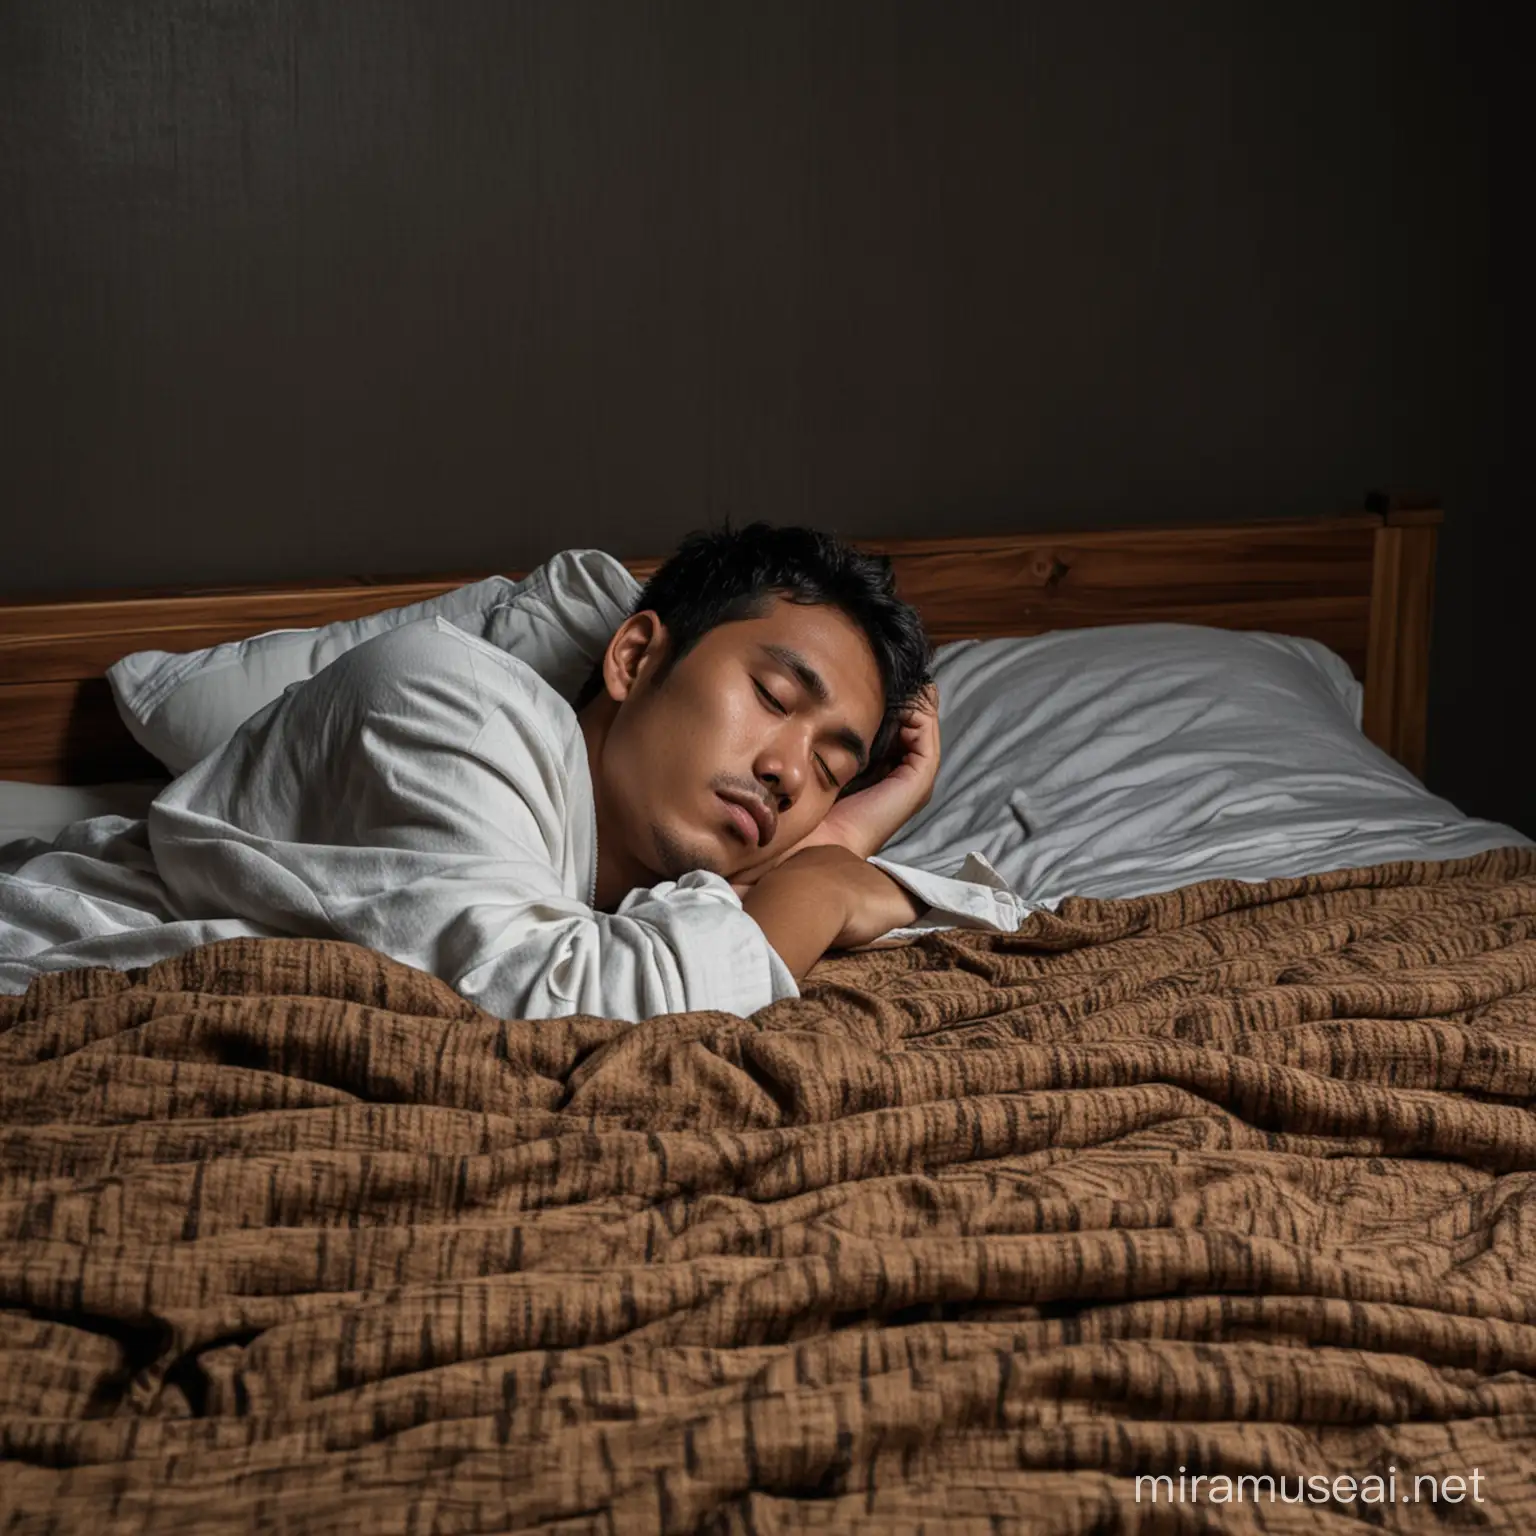 prompt: a young Indonesian man is sick, wearing a blanket, he falls asleep on a wooden bed, the background is dark. 